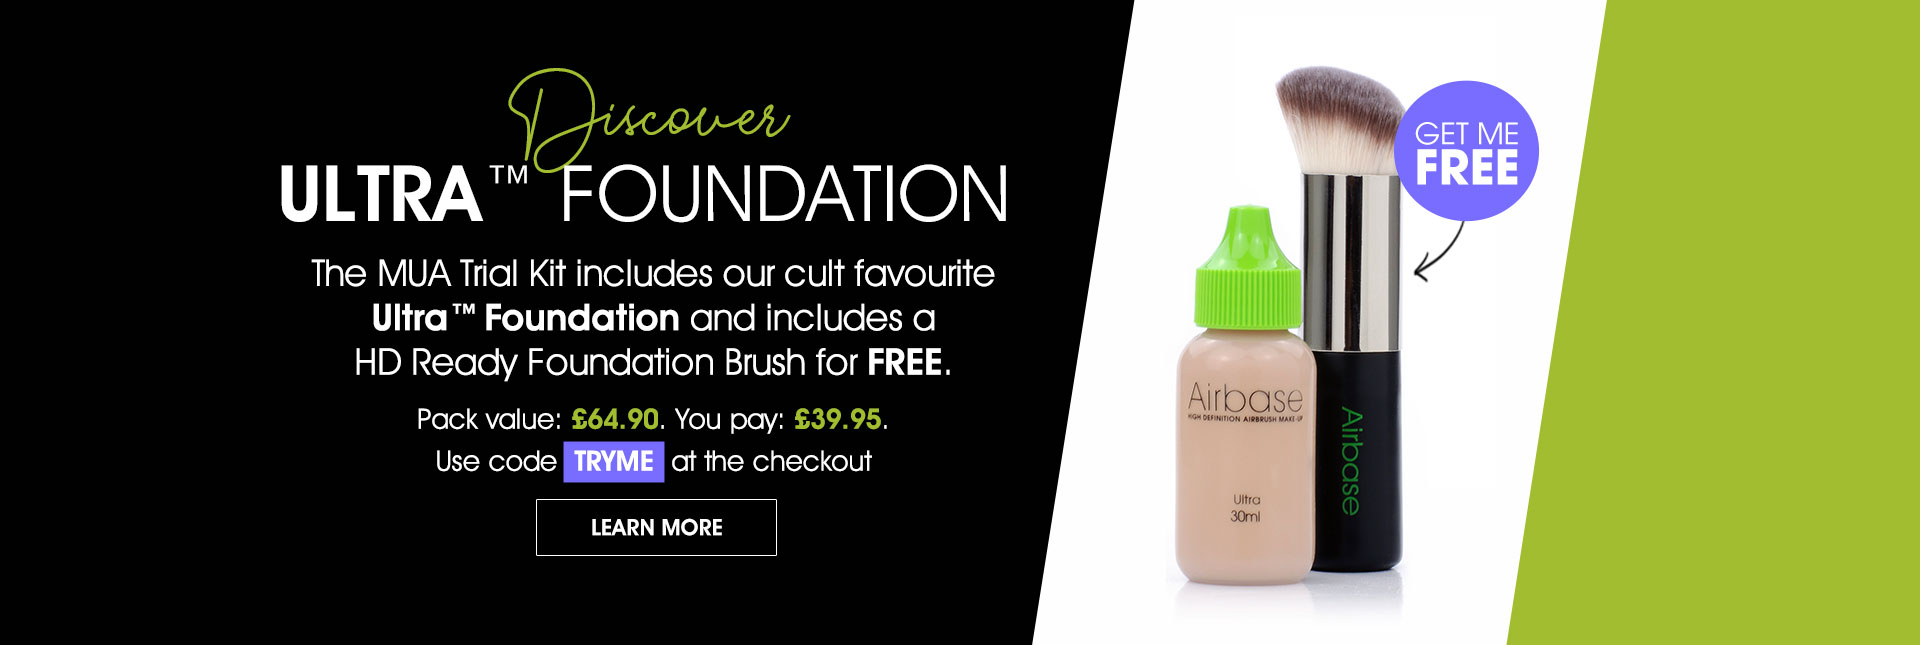 Discover Ultra™ Foundation with oura Silicone HD Ready Foundation Brush absolutely free.